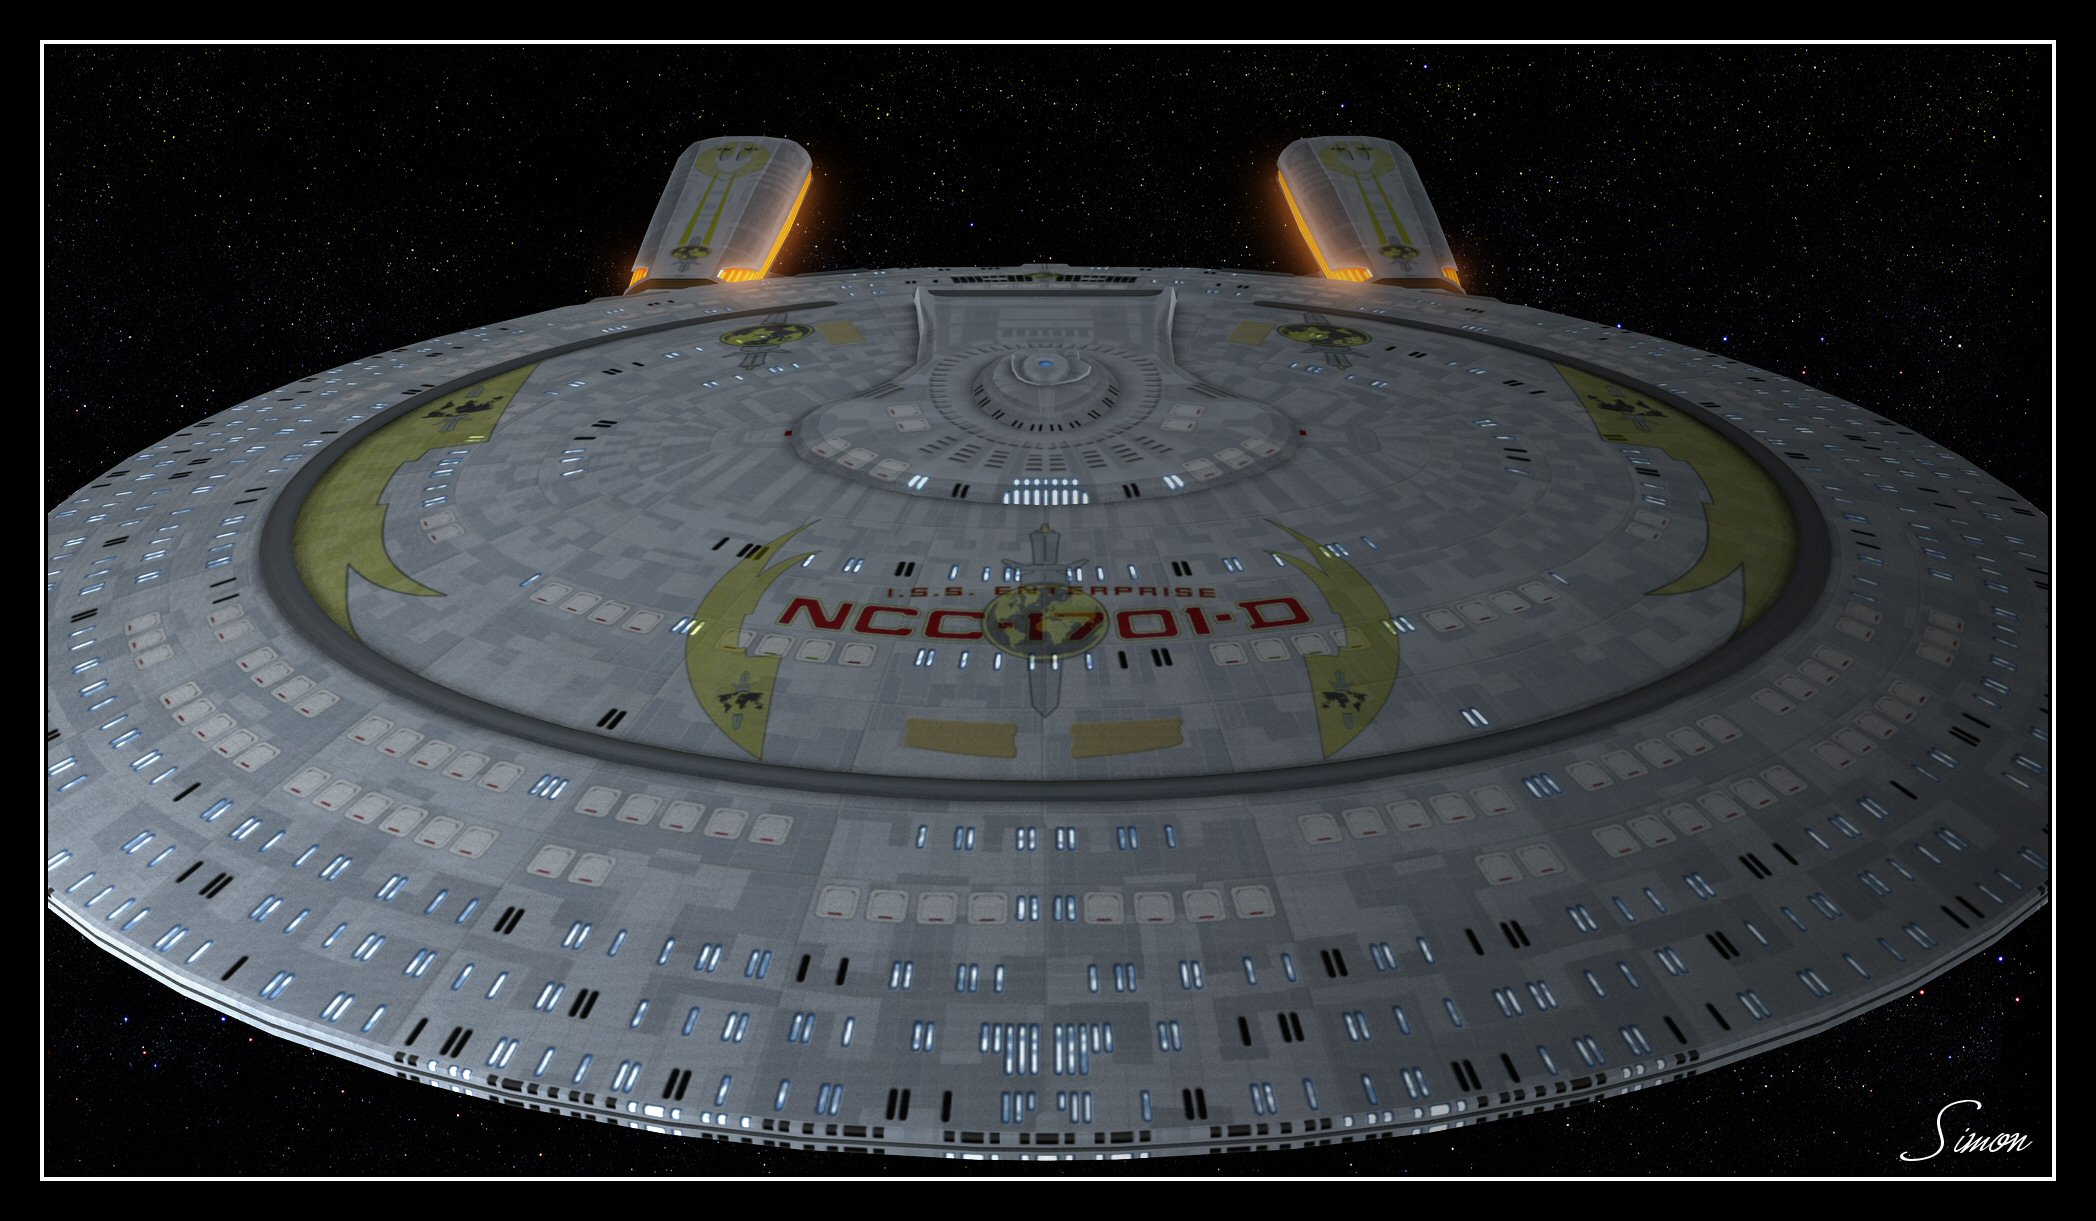 ISS Enterprise NCC-1701-D; The Flagship of the Terran Empire!